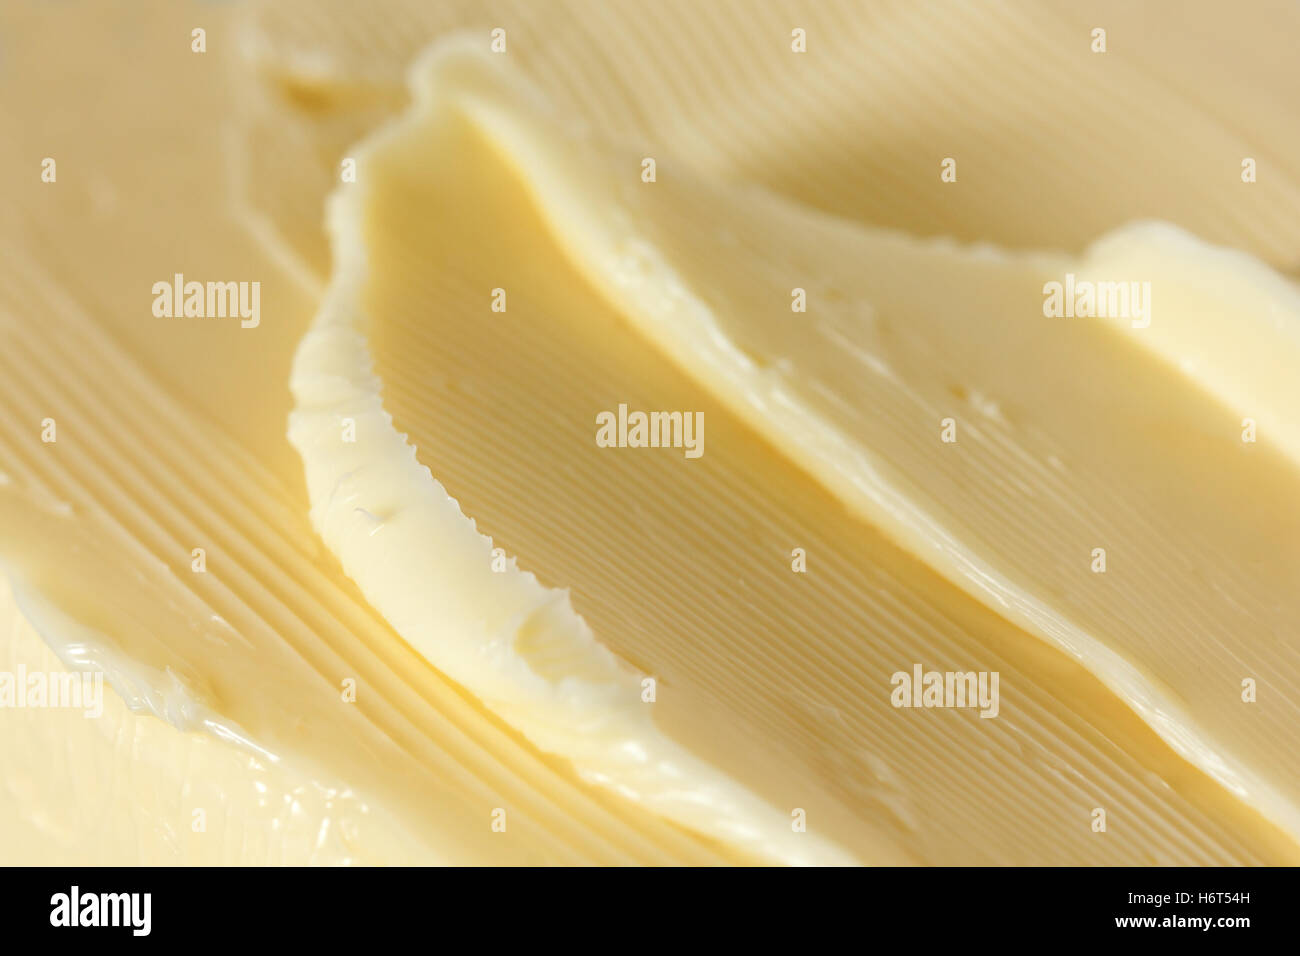 Soft butter spread into an abstract shape Stock Photo